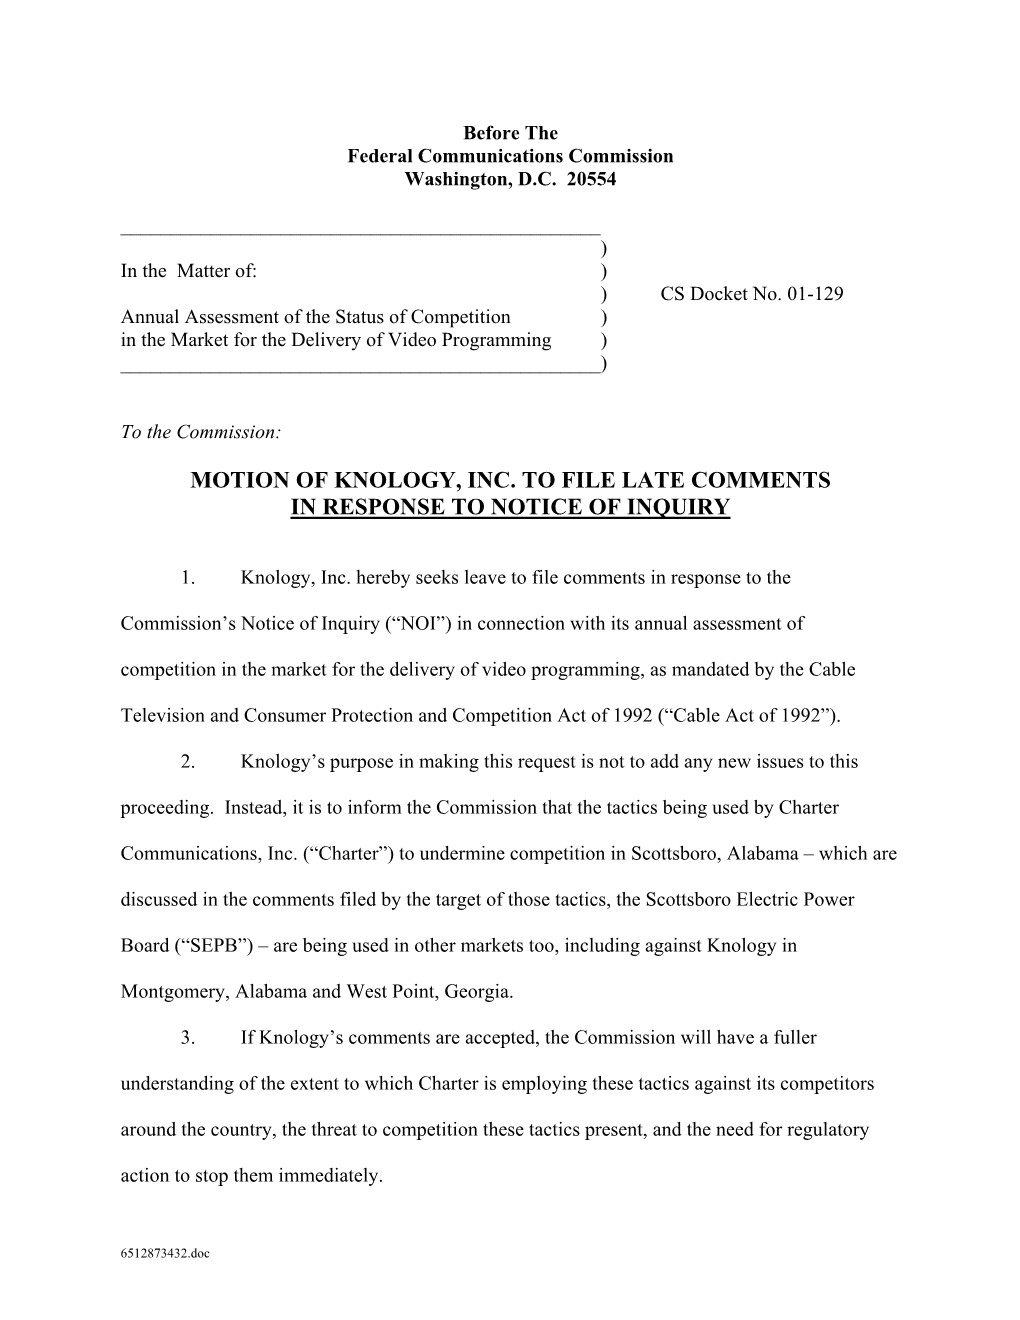 Motion of Knology, Inc. to File Late Comments in Response to Notice of Inquiry